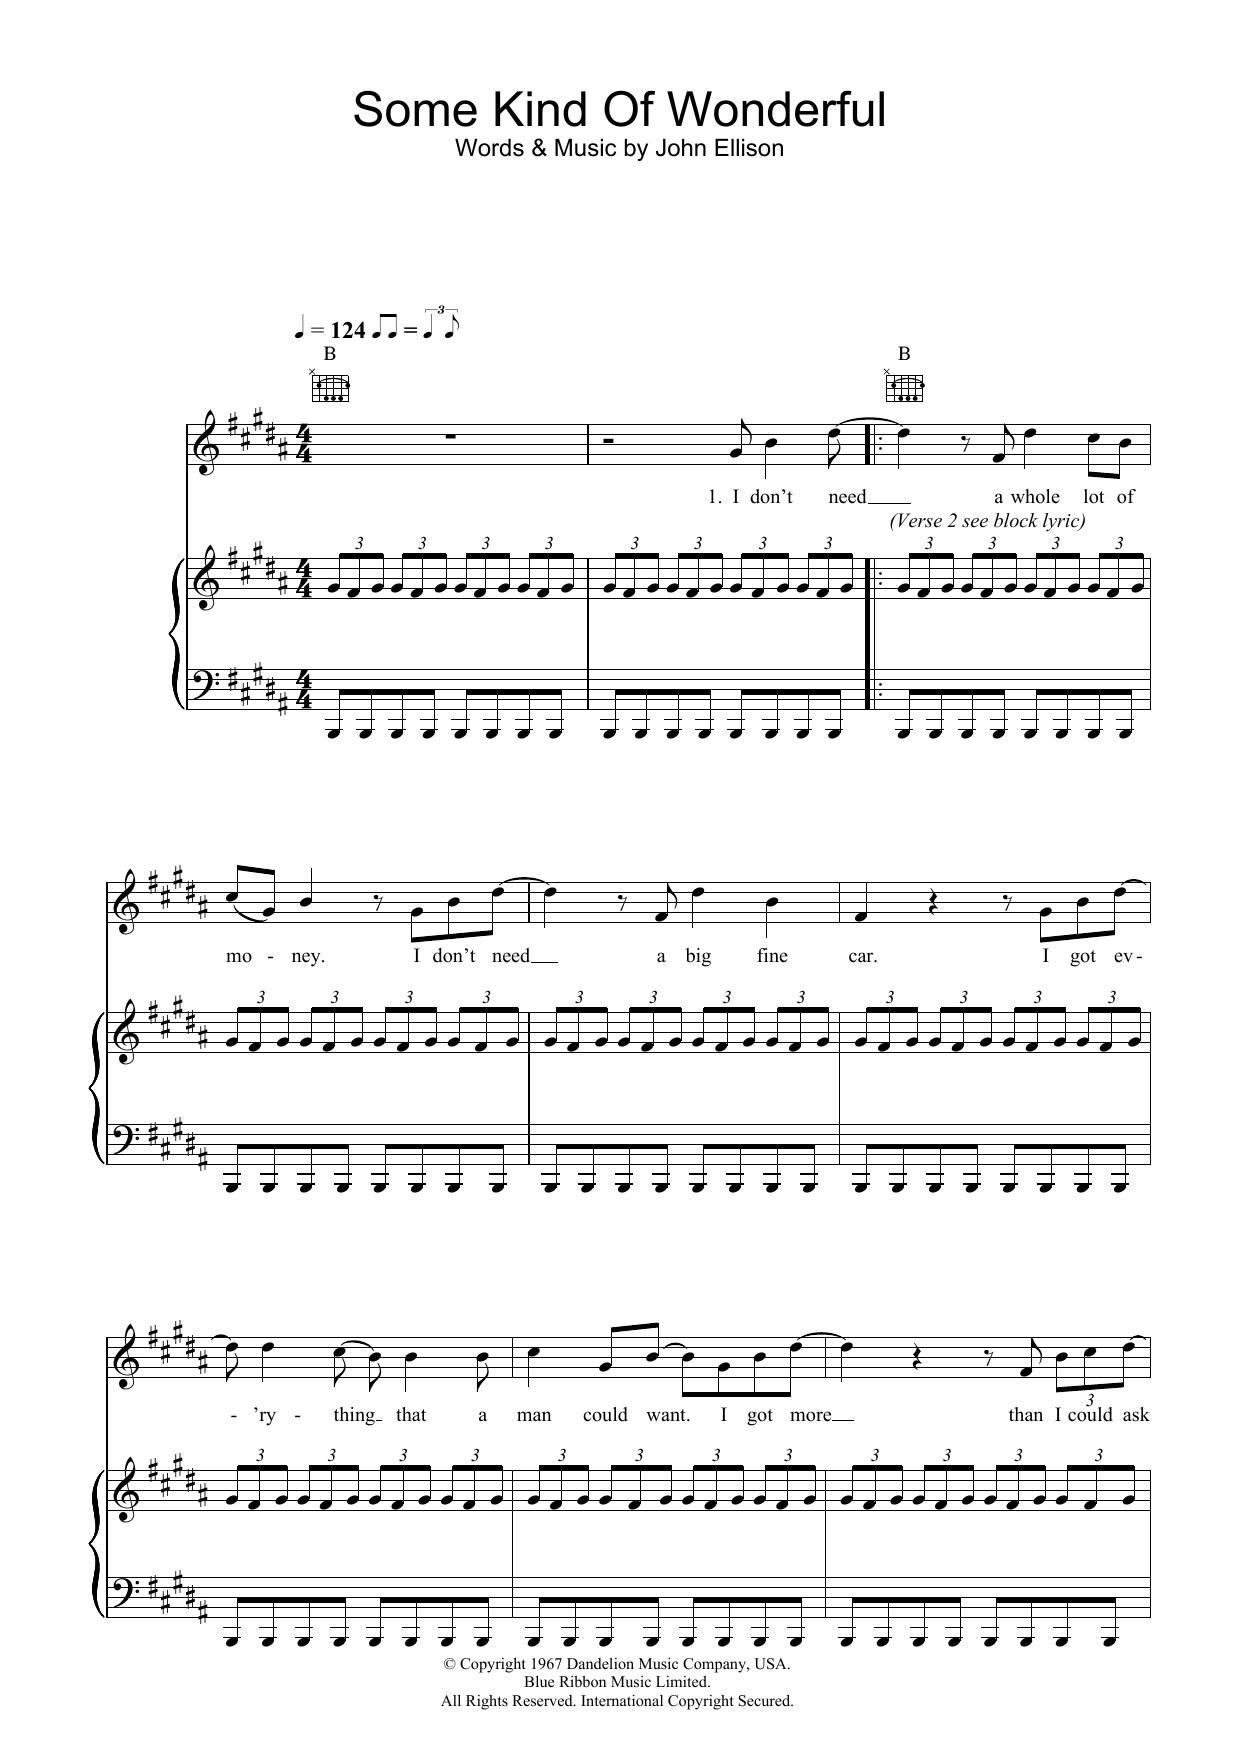 Download Toploader Some Kind Of Wonderful sheet music notes and chords for Piano, Vocal & Guitar - Download Printable PDF and start playing in minutes.